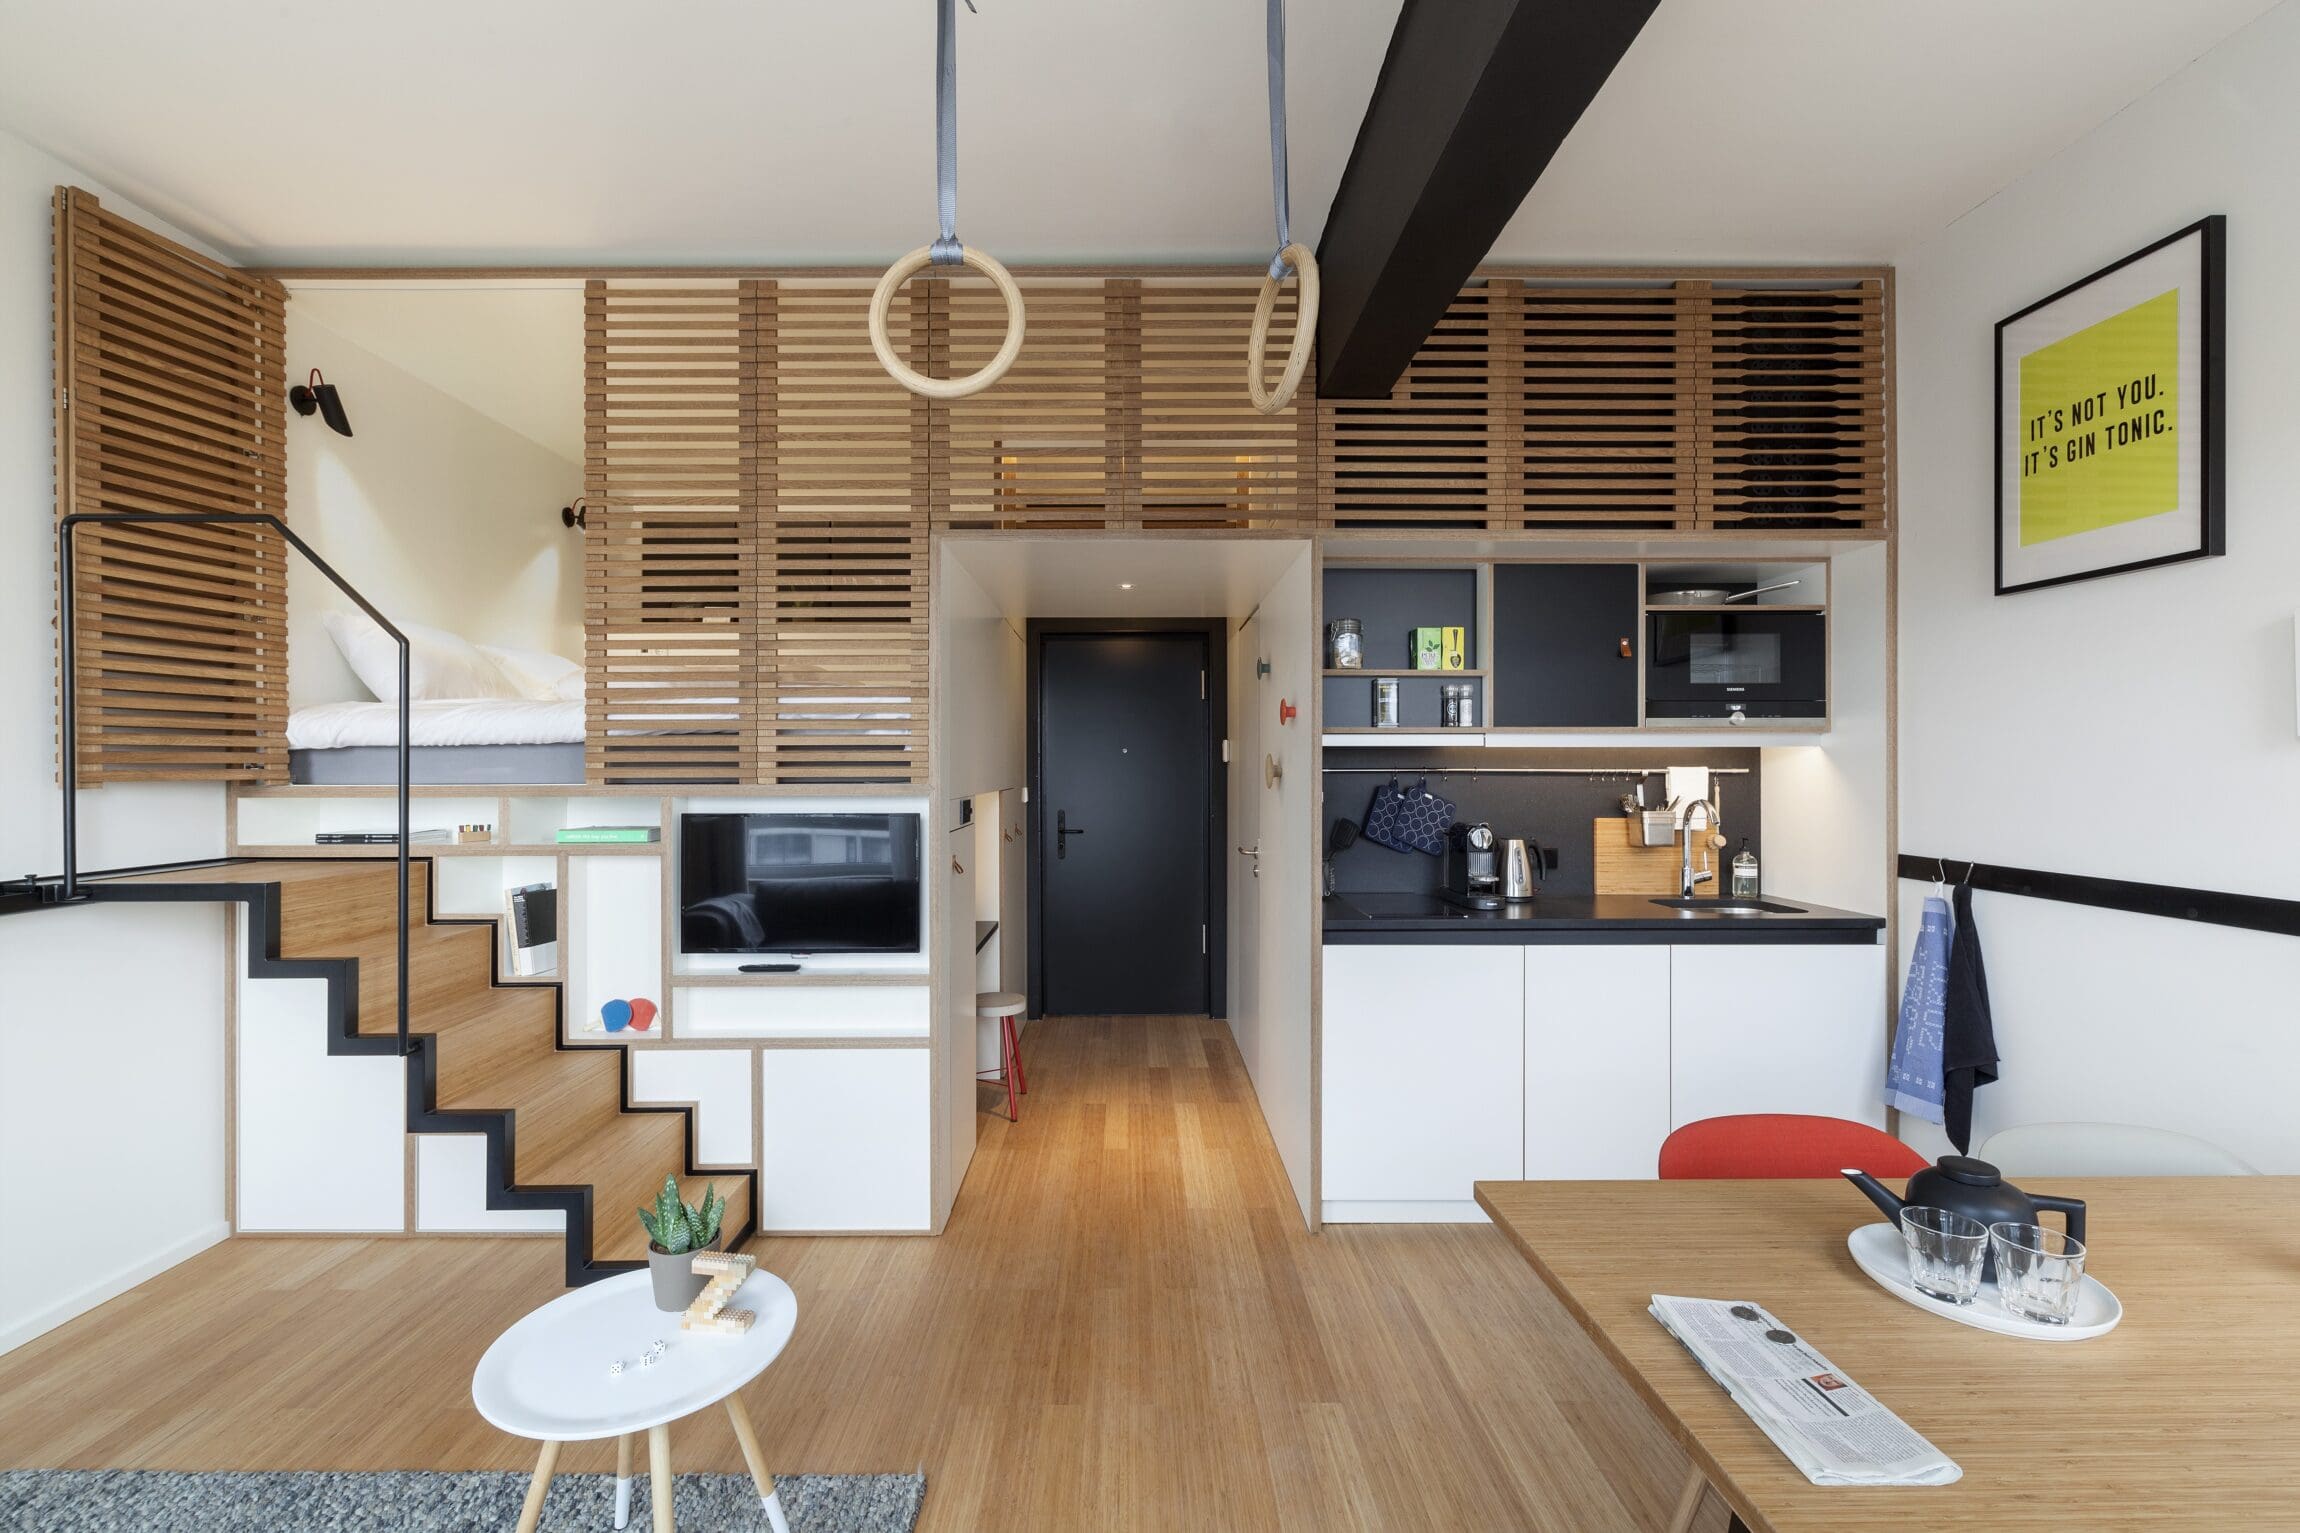 The best hotels in Amsterdam | This apartment style room at Zoku hotel features a lofted bed, a kitchen, and a dining table.